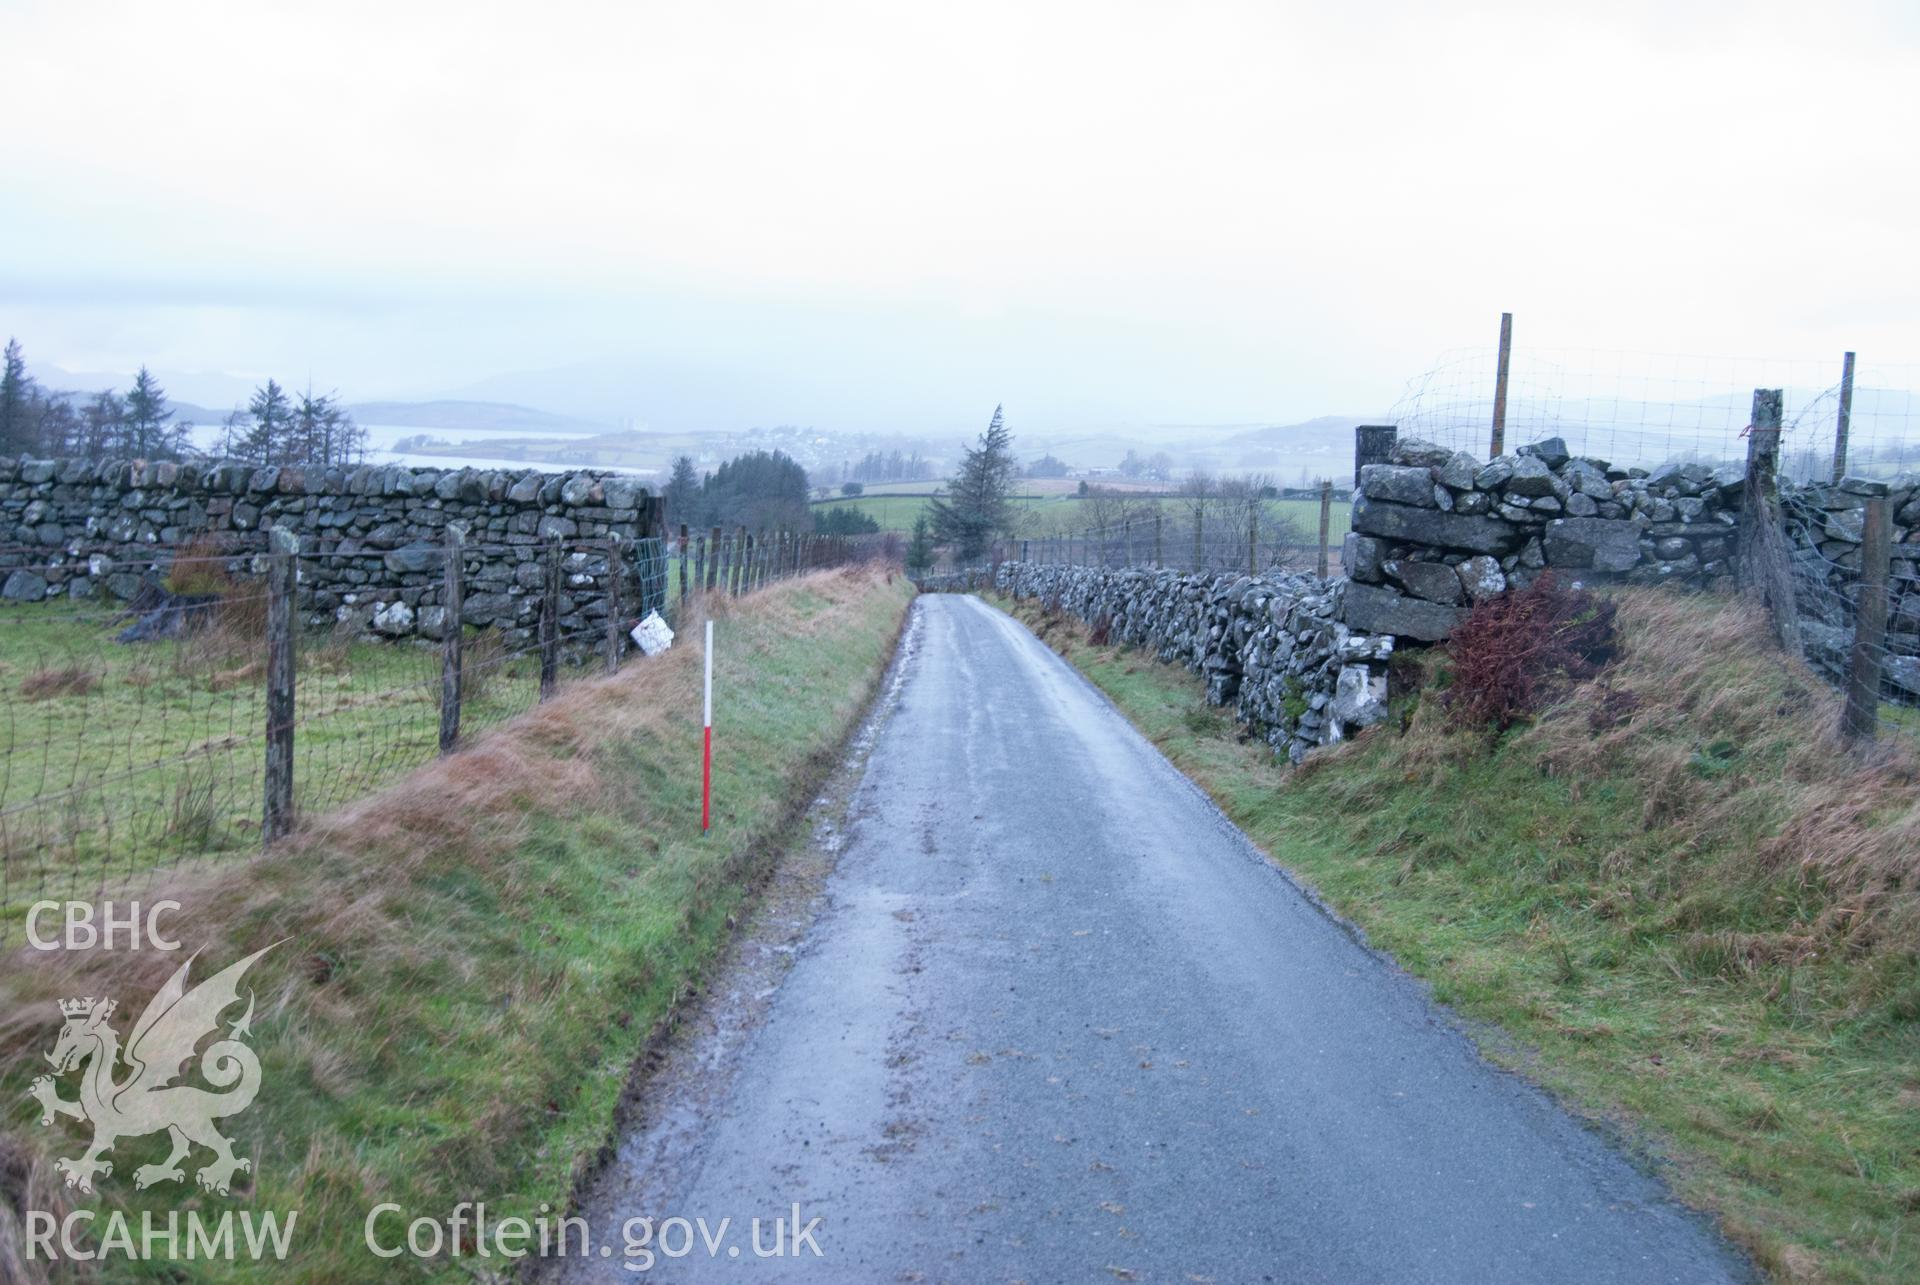 View from south, showing view along road, up from entrance to Bryn Llefrith.